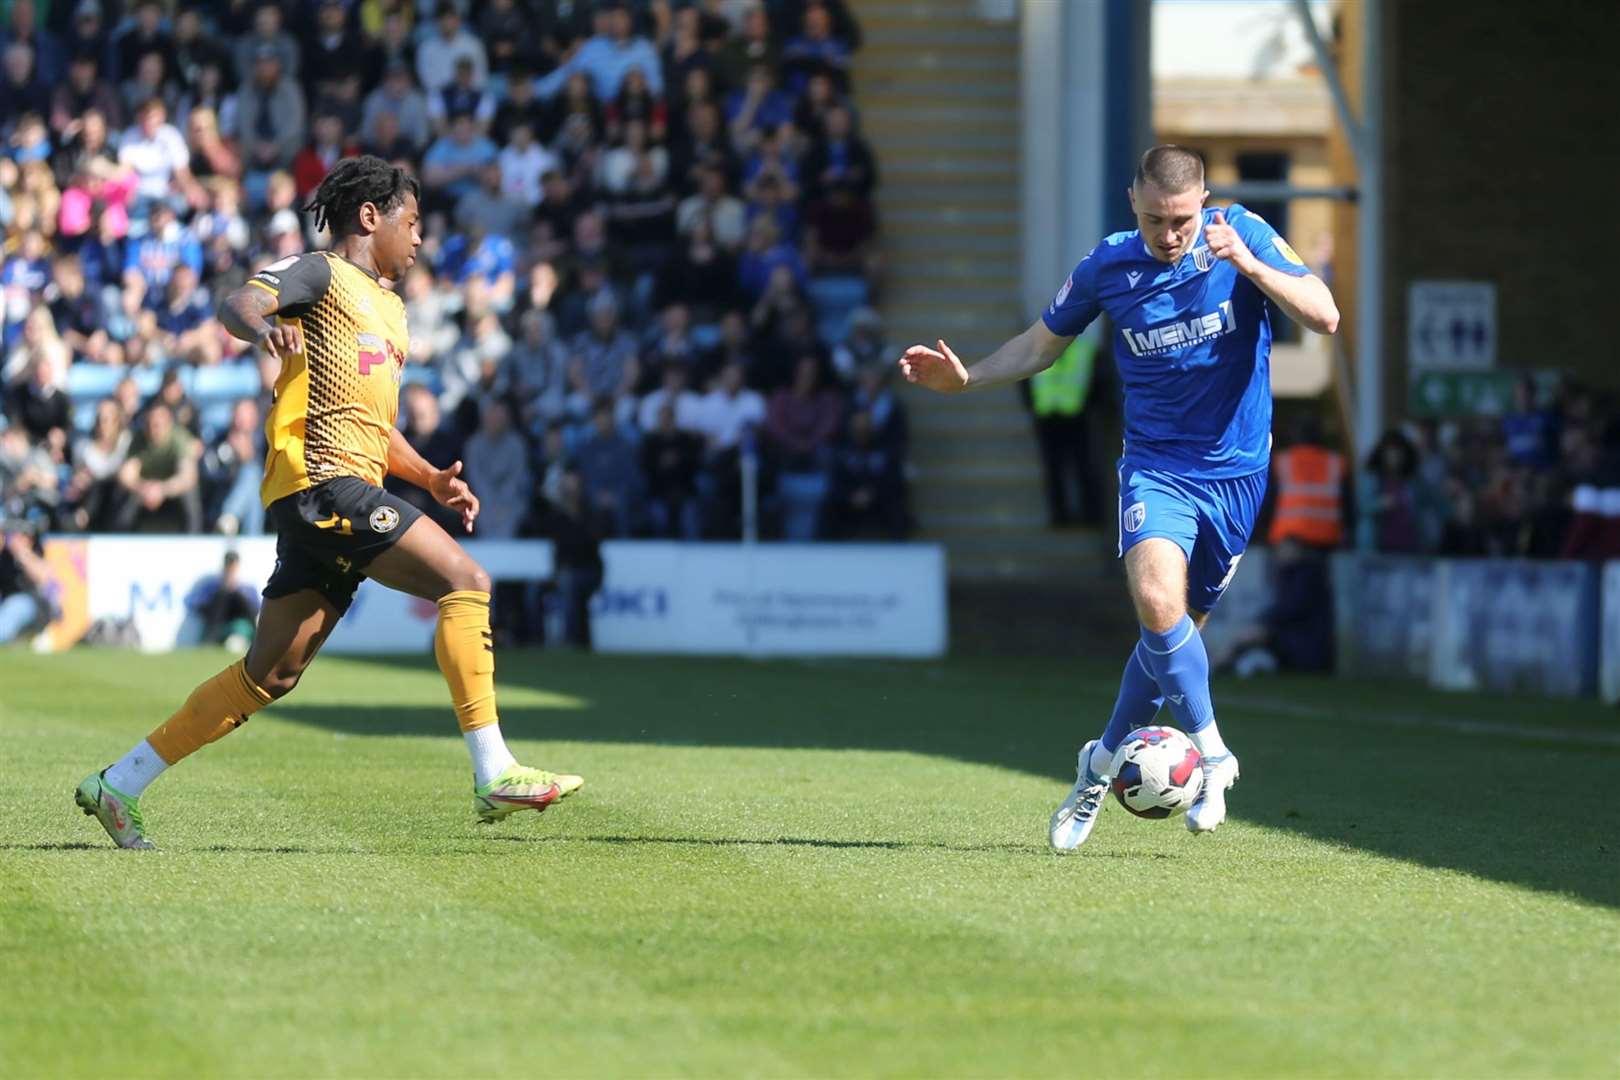 Gillingham’s Dom Jefferies on the attack against Newport at Priestfield